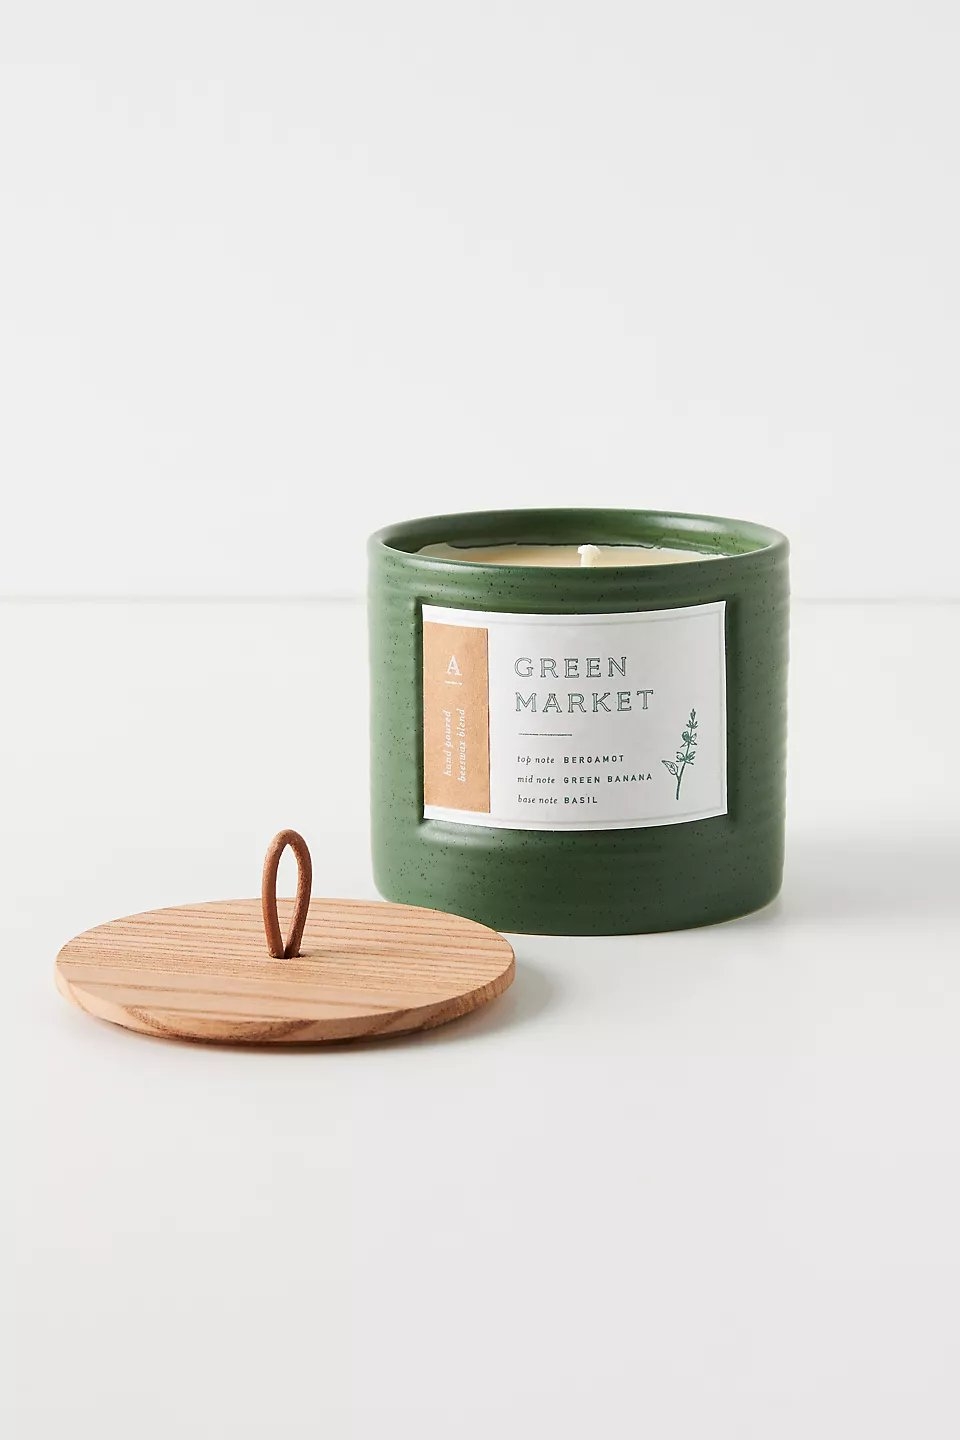 Hive & Wick Market Ceramic Candle By Anthropologie in Assorted - Image 0